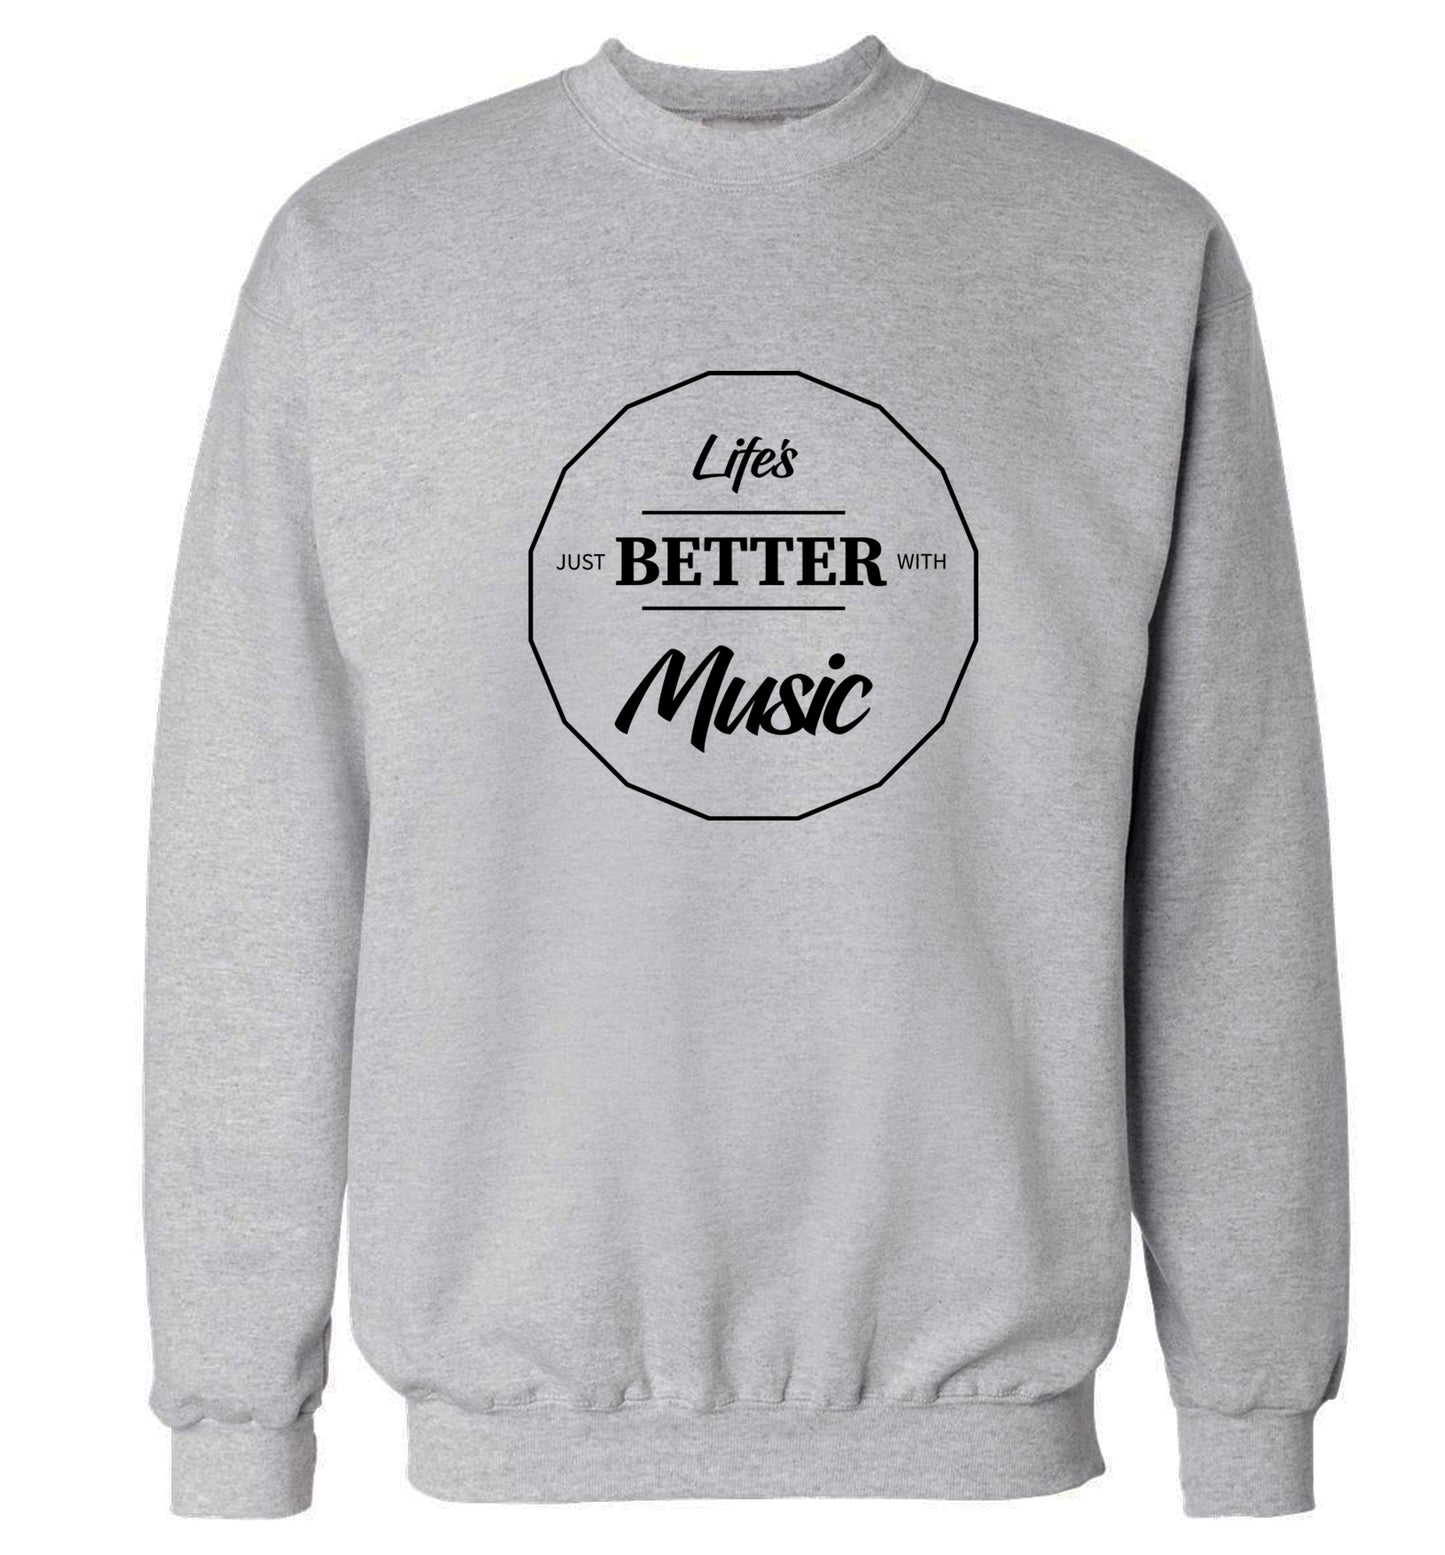 Life is Better With Music Adult's unisex grey Sweater 2XL